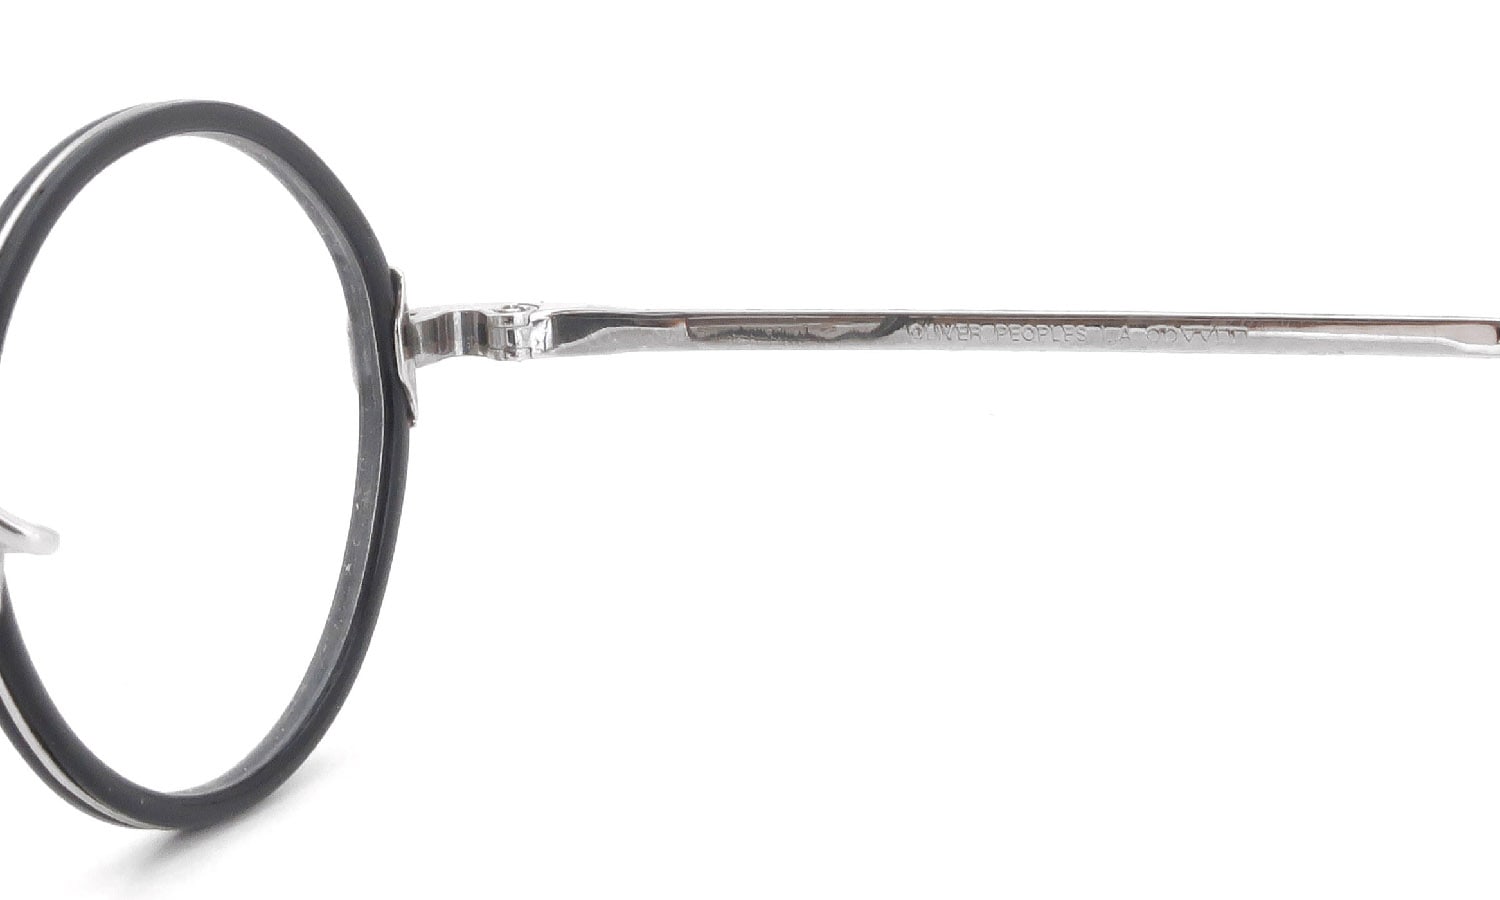 OLIVER PEOPLES 1990's PATTY S